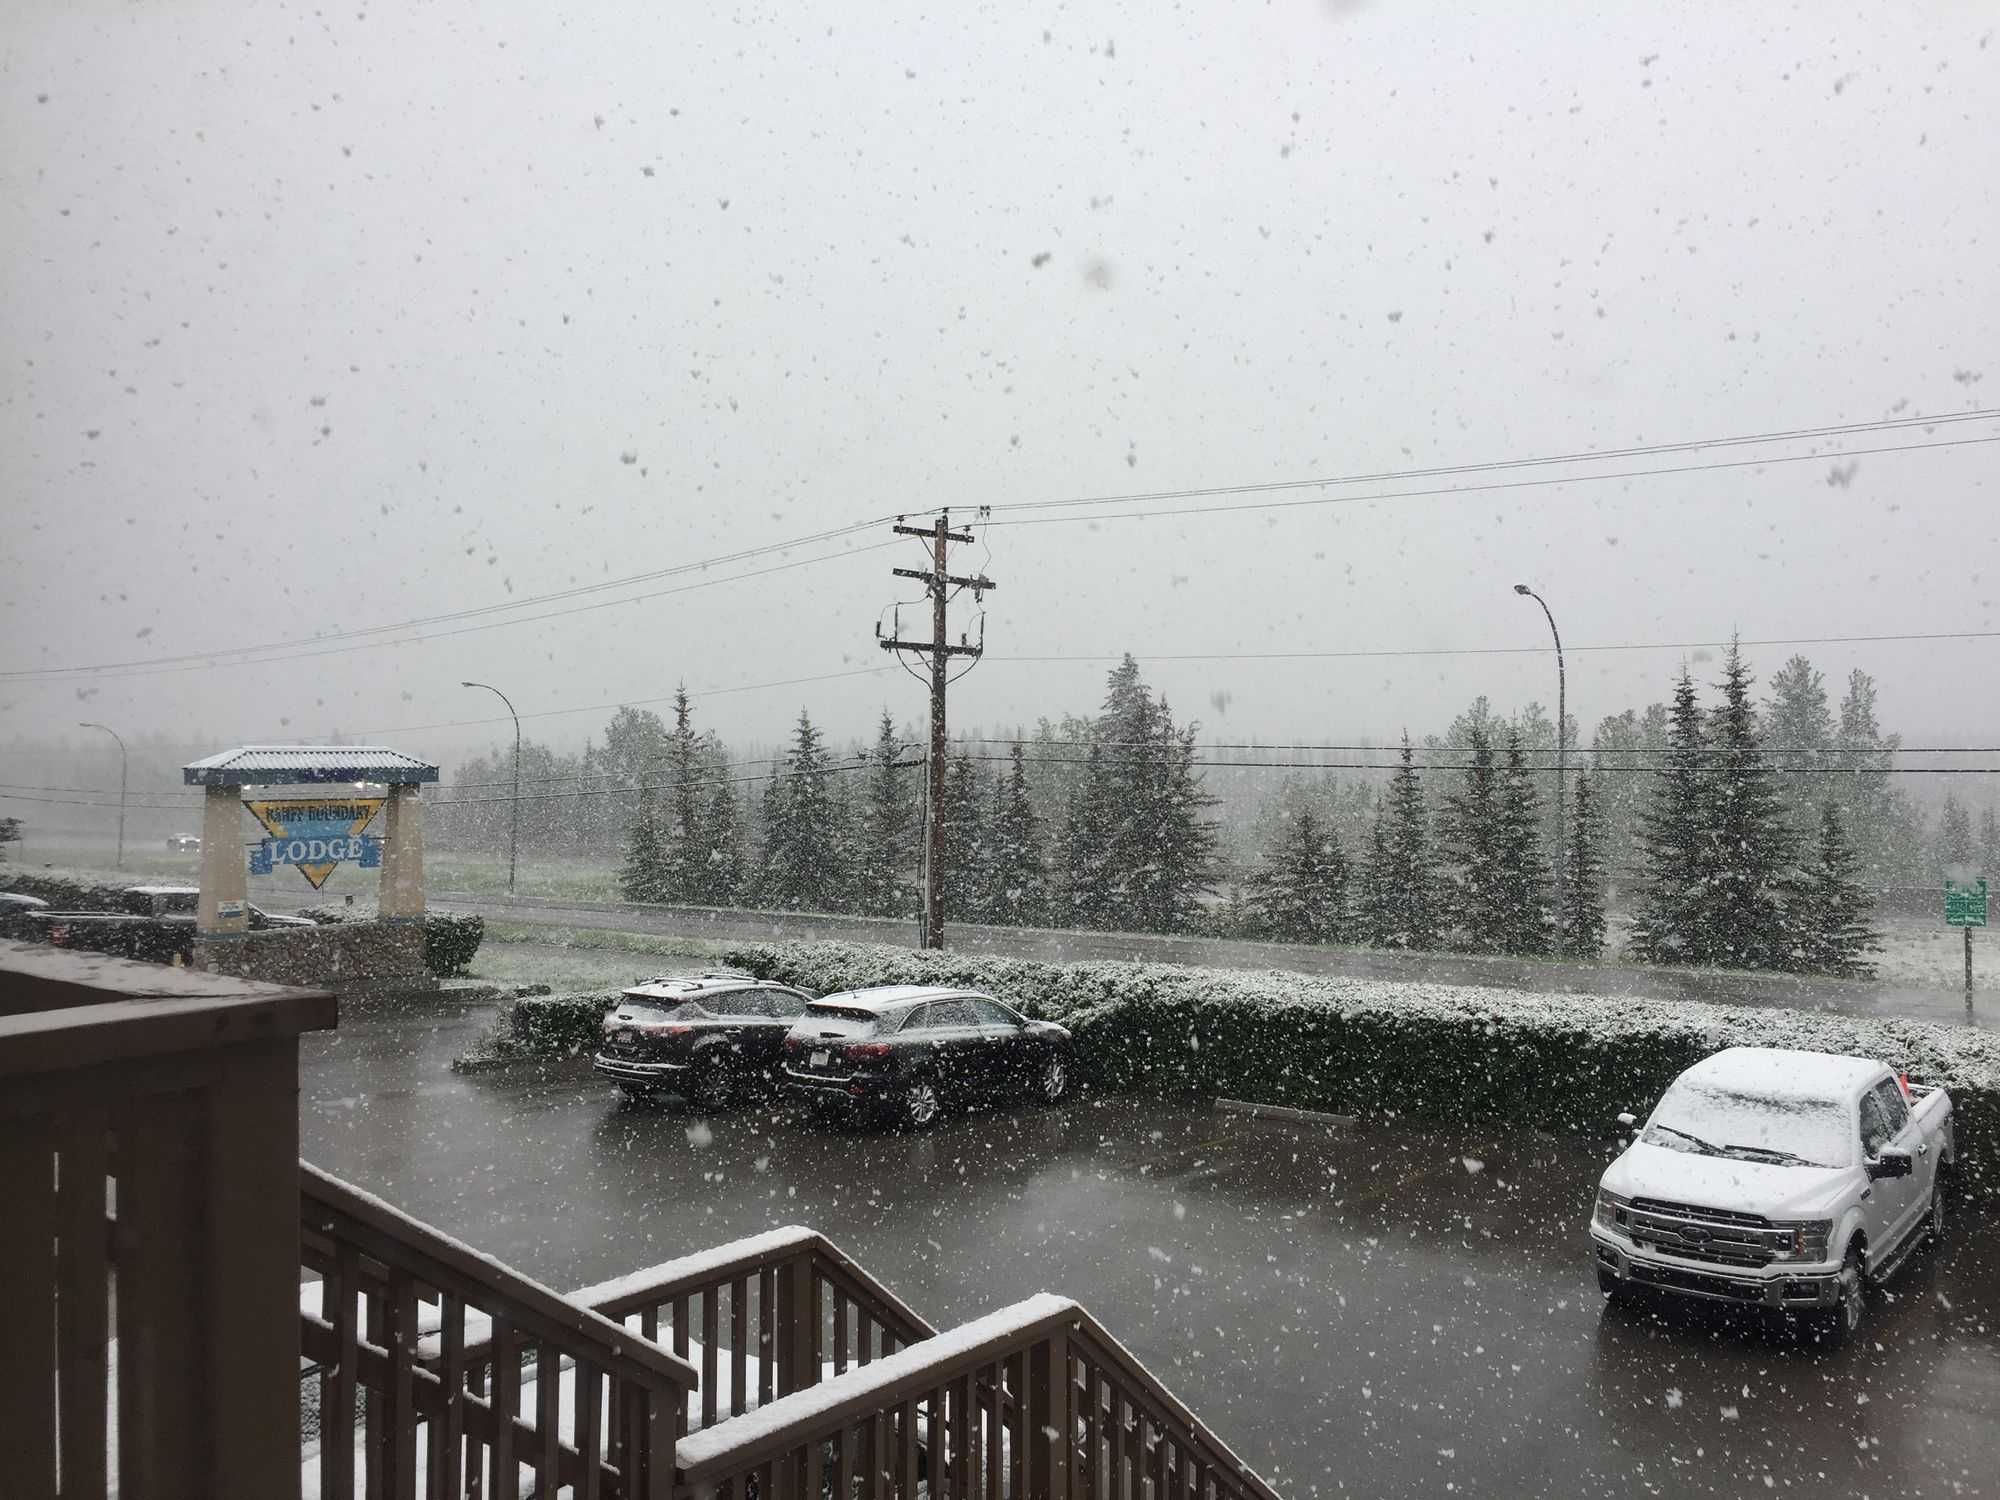 A snowy day in June at Canmore (Image by author)